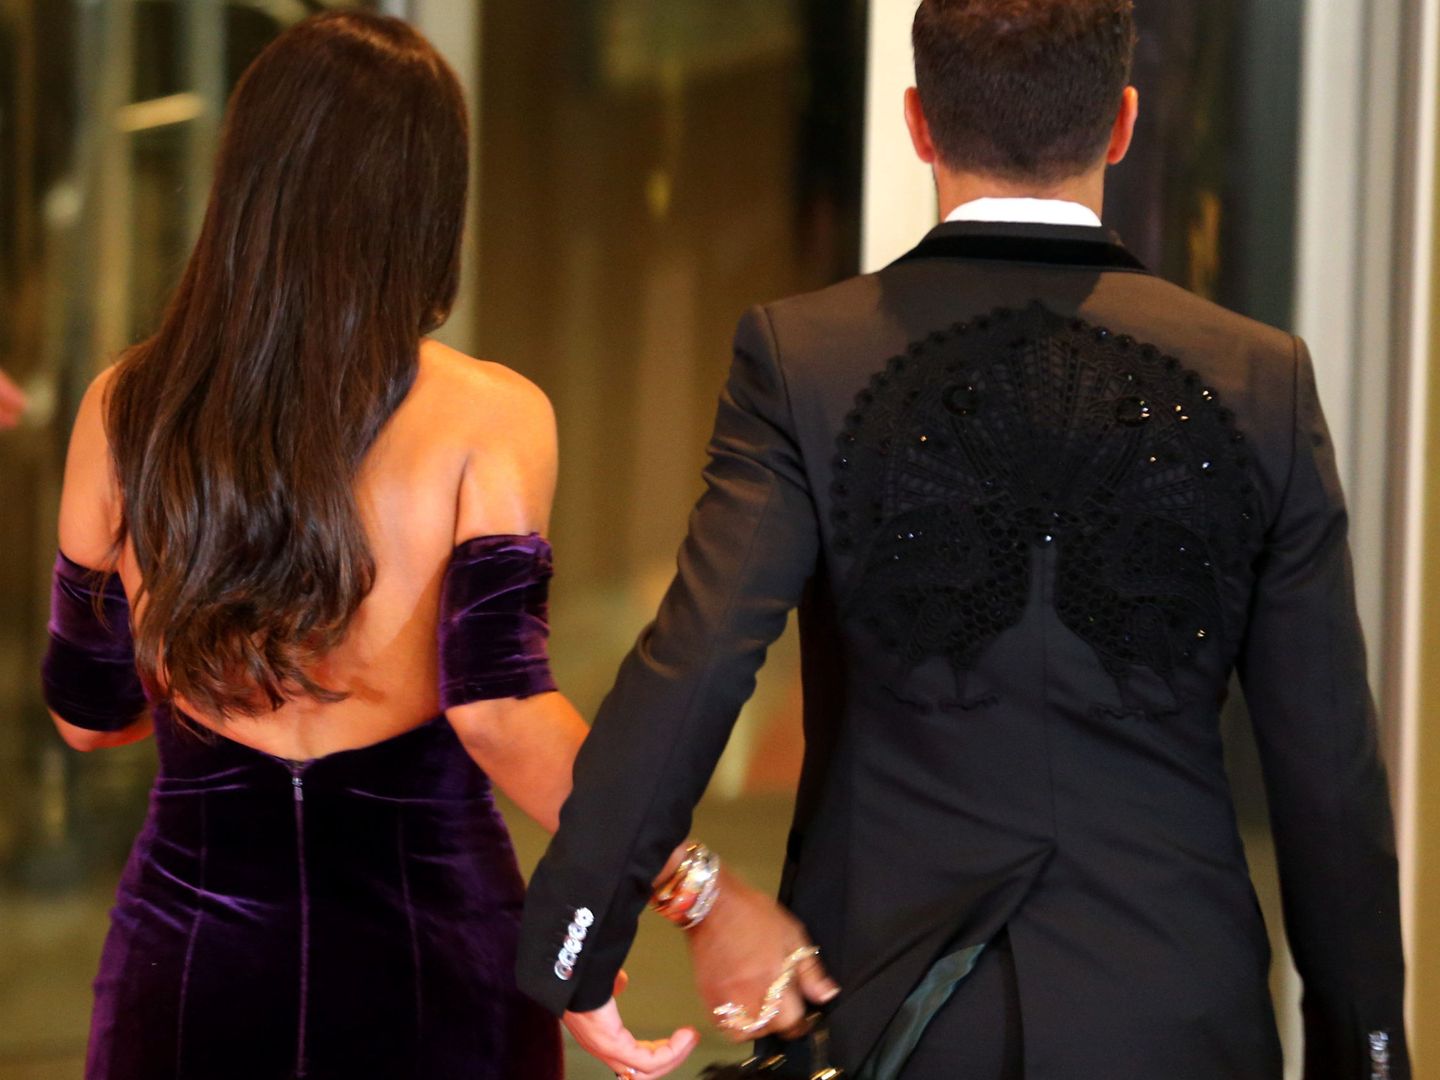 Argentine soccer player Lionel Messi's former Barcelona FC teammate Cesc Fabregas and his wife Daniella Semaan leave after posing for photographers as they arrive to the wedding of Messi and Antonela Roccuzzo in Rosario, Argentina, June 30, 2017. REUTERS Marcos Brindicci